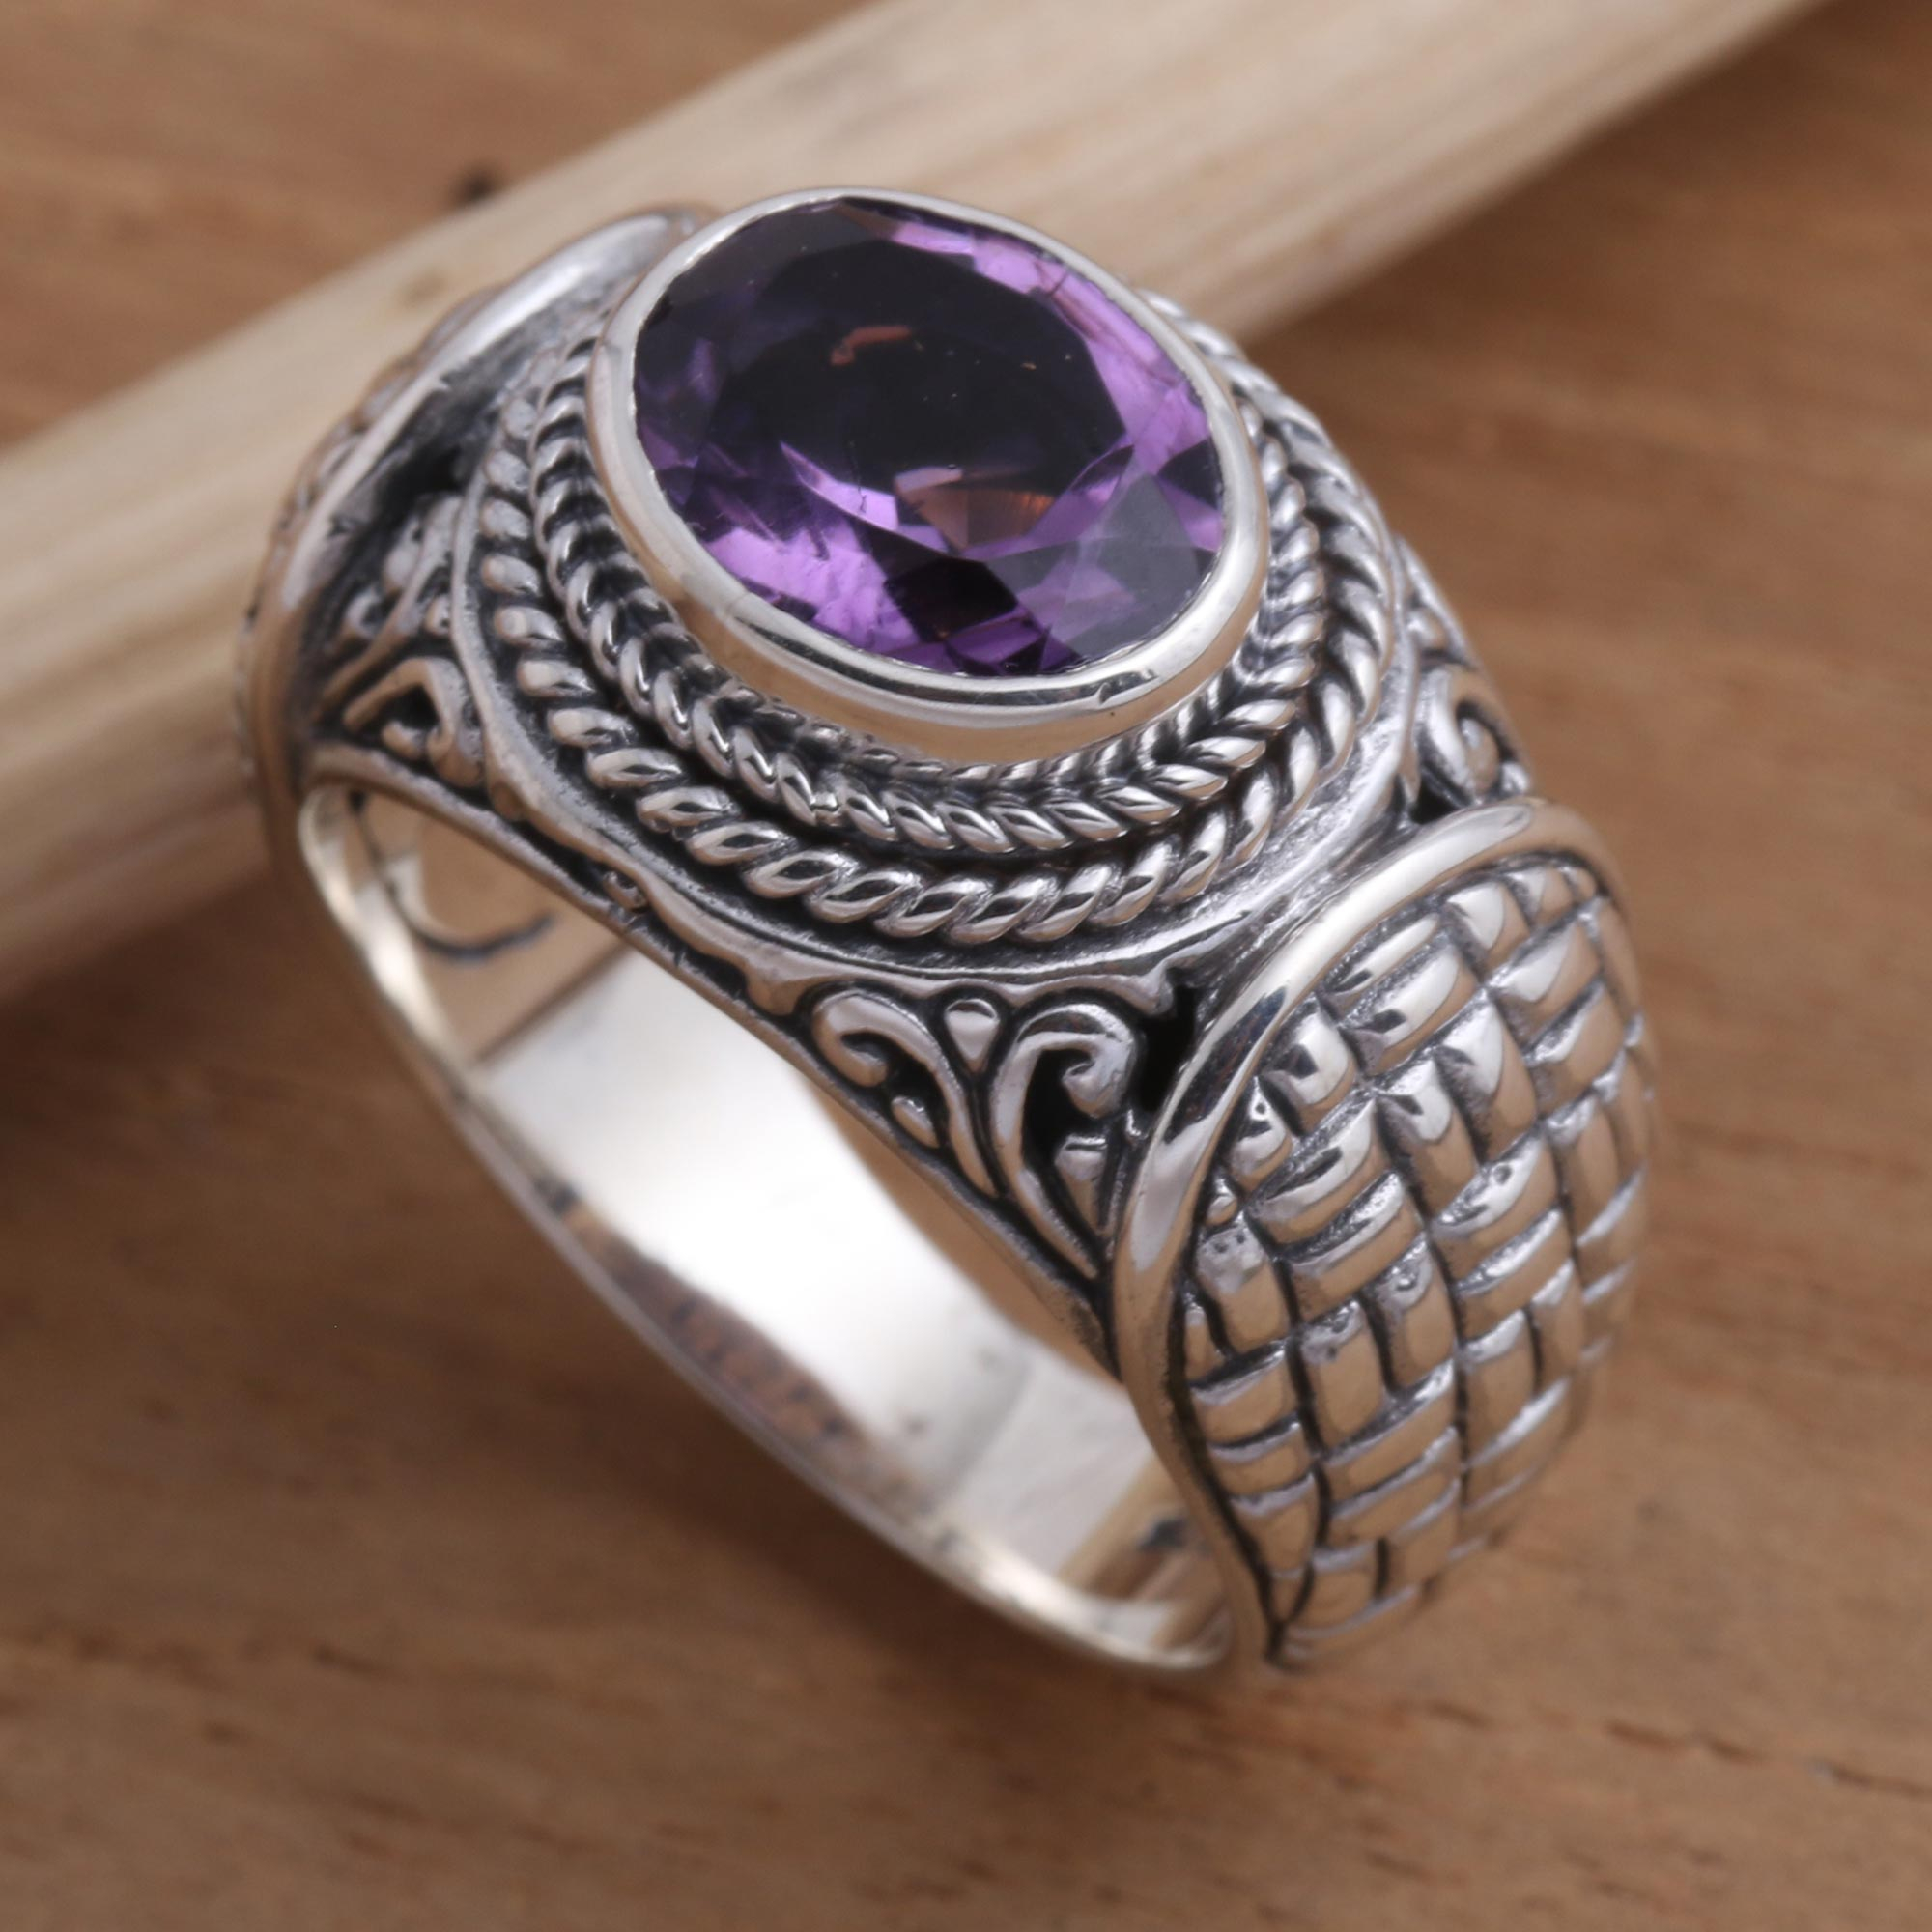 Amethyst and Sterling Silver Signet Ring - Woven Vines | NOVICA